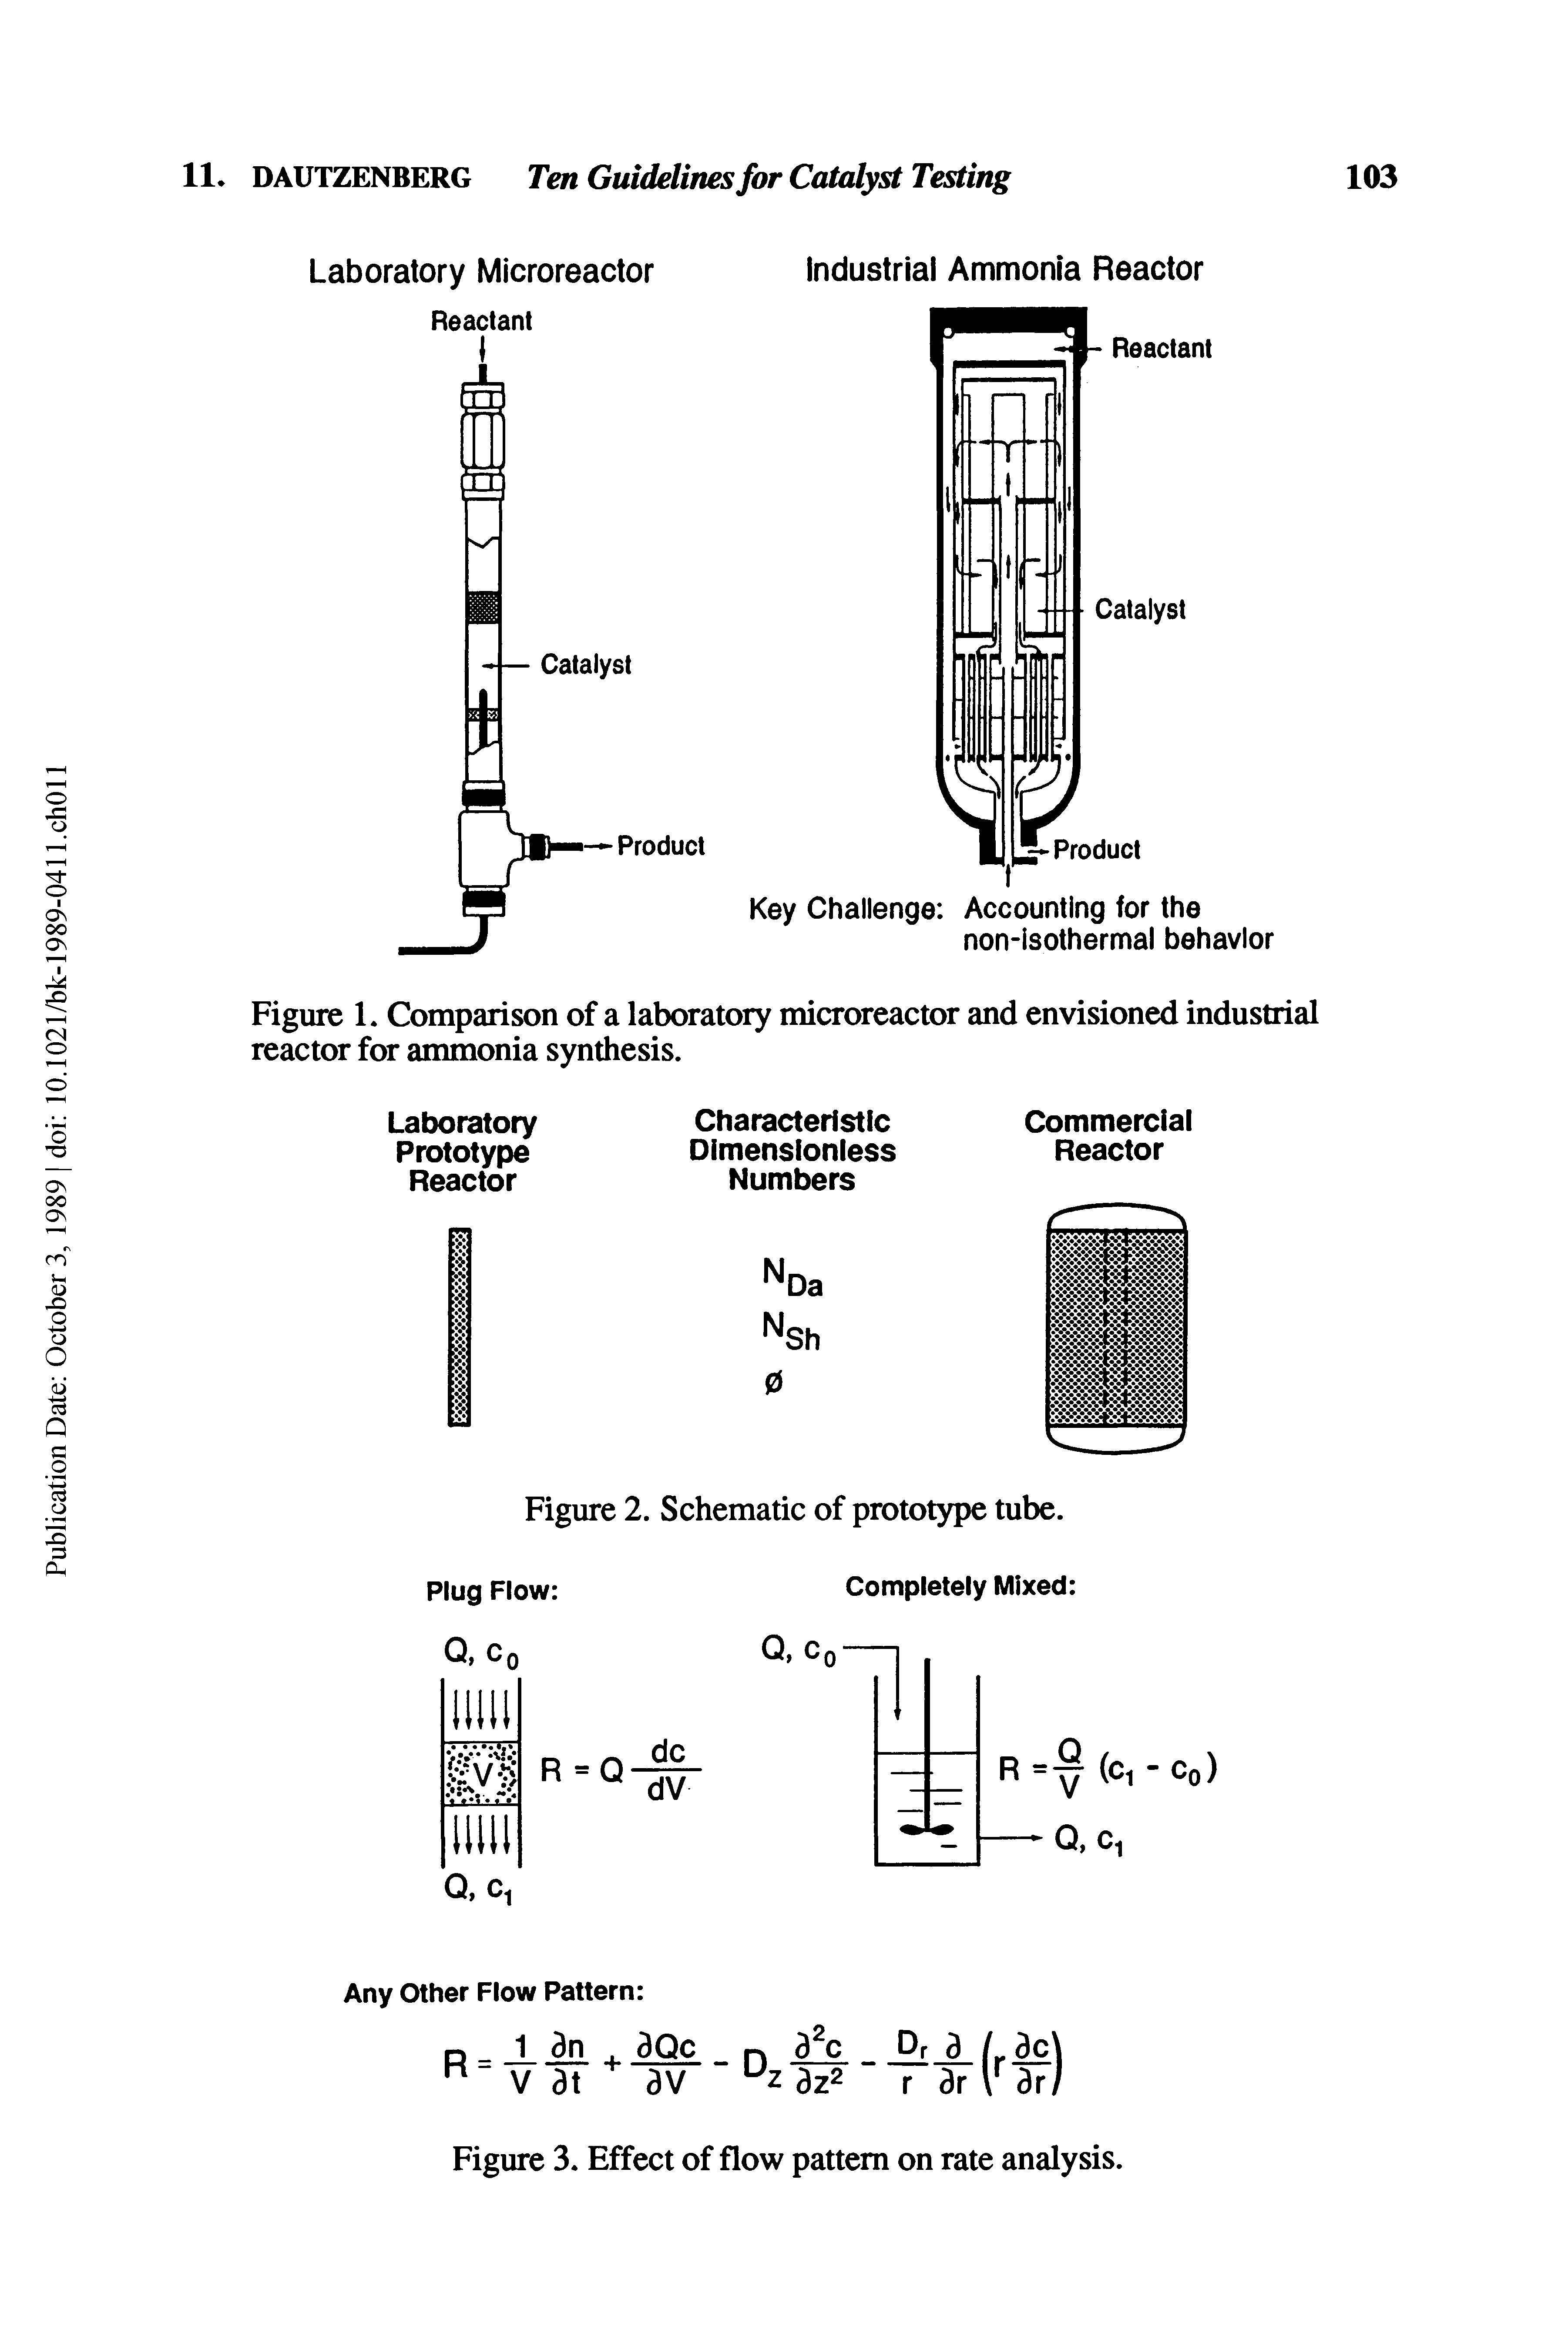 Figure 1. Comparison of a laboratory microreactor and envisioned industrial reactor for ammonia synthesis.